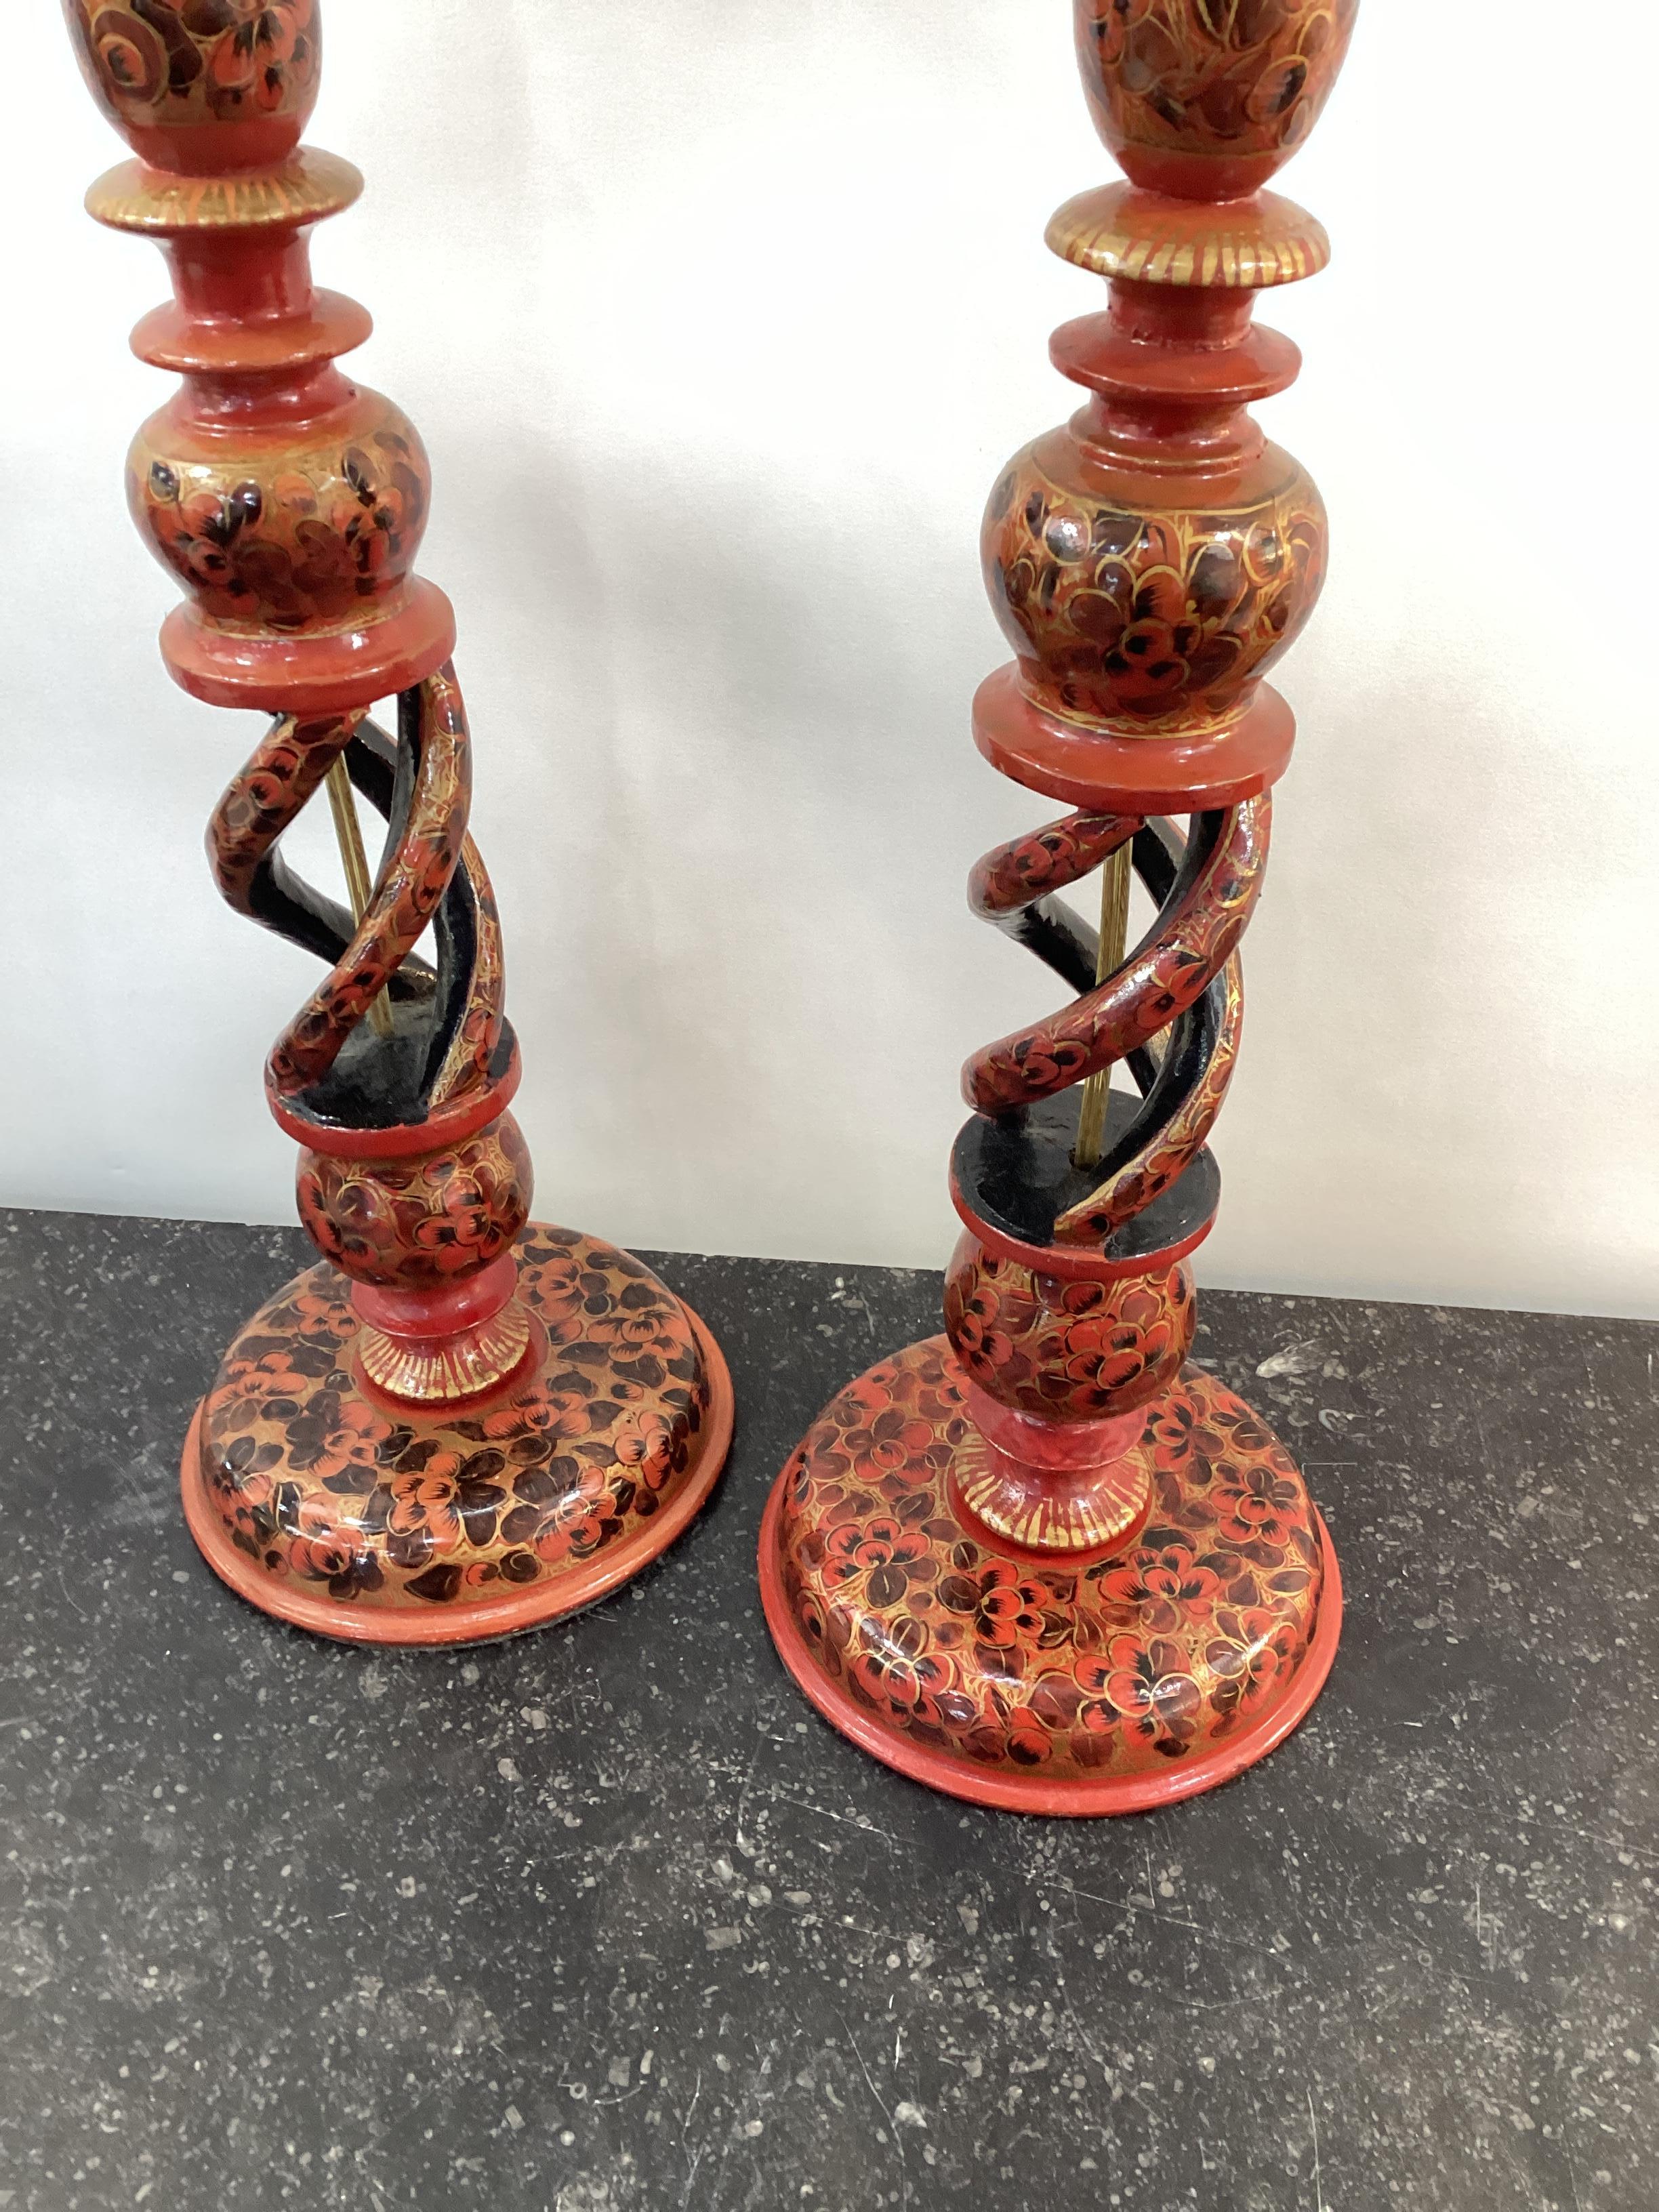  Pair of Vintage Kashmiri Candlestick Lamps with red lacquer decoration. Wired and in good working condition. Measures 17” to the top of the candlestick.